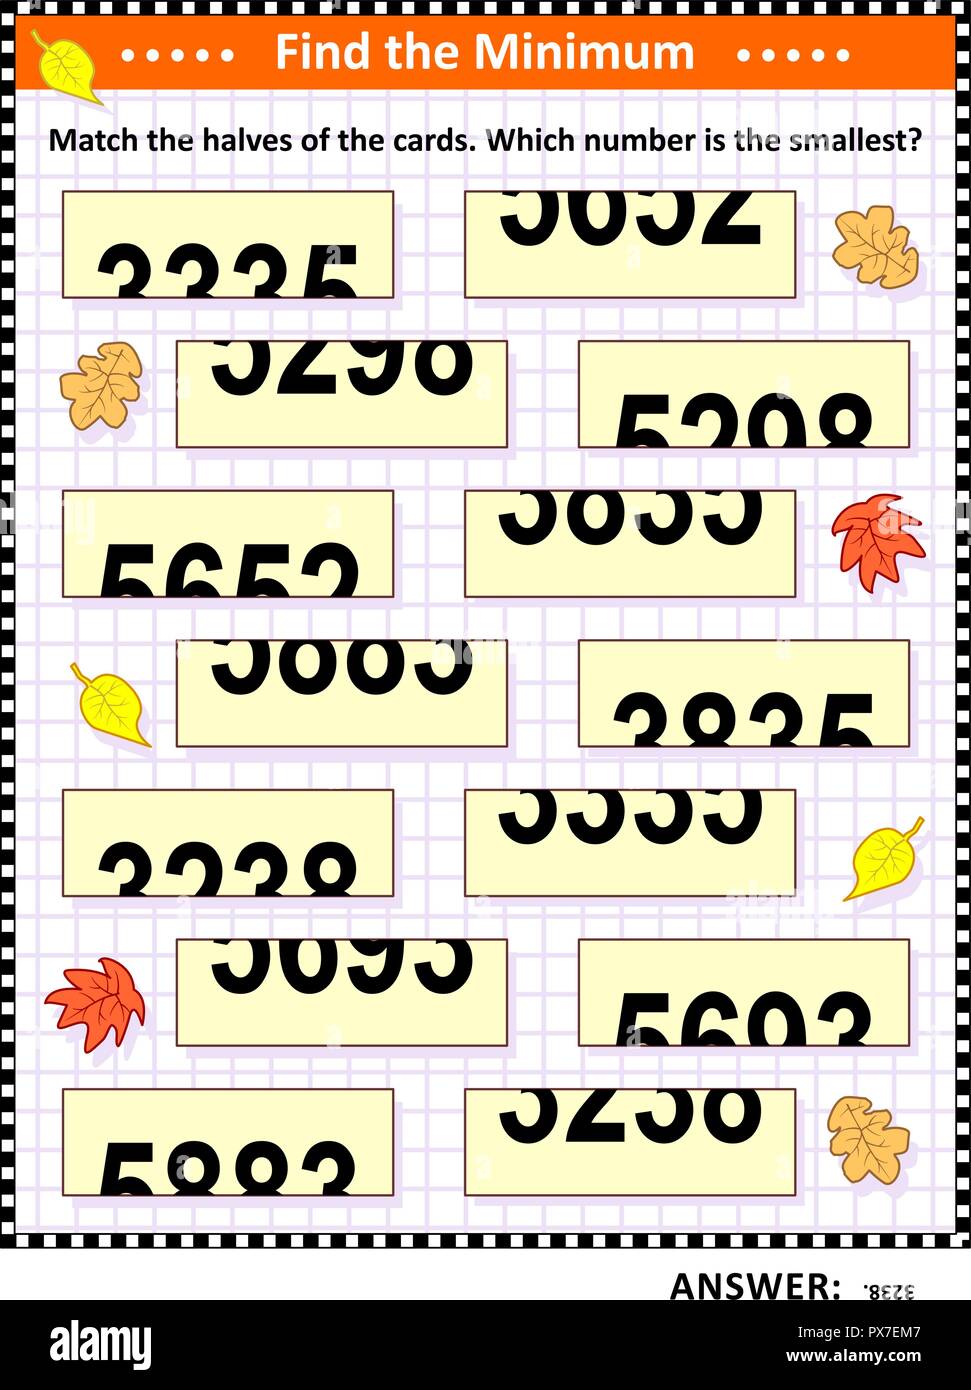 Math visual puzzle: Find the minimum. Match the halves of the cards. Which number is the smallest? Answer included. Stock Vector